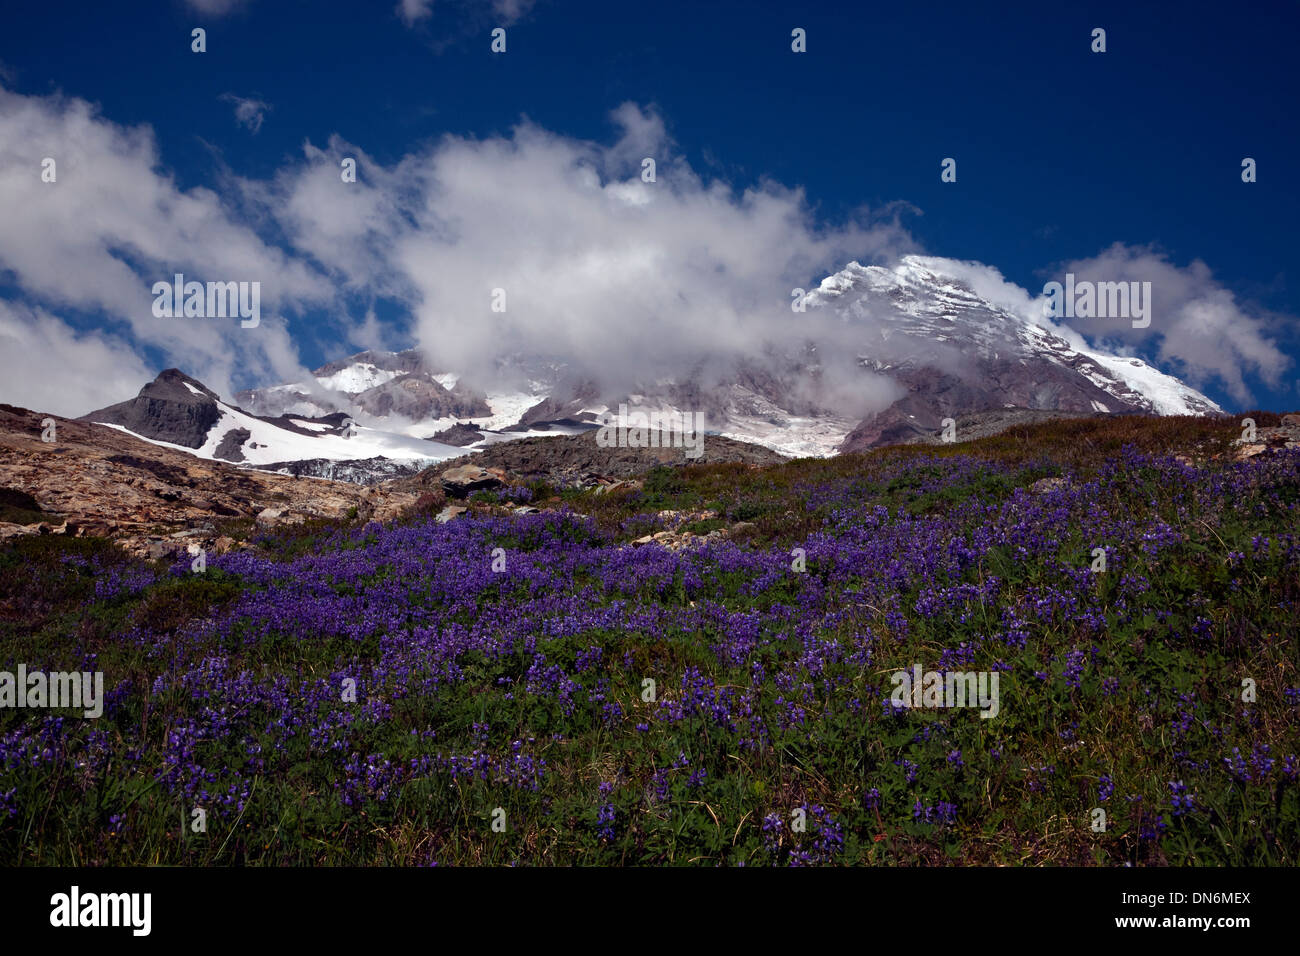 Mount Rainier and the Tahoma Glacier from a lupine covered meadow on a shoulder of Pyramid Peak in Mount Rainier National Park. Stock Photo